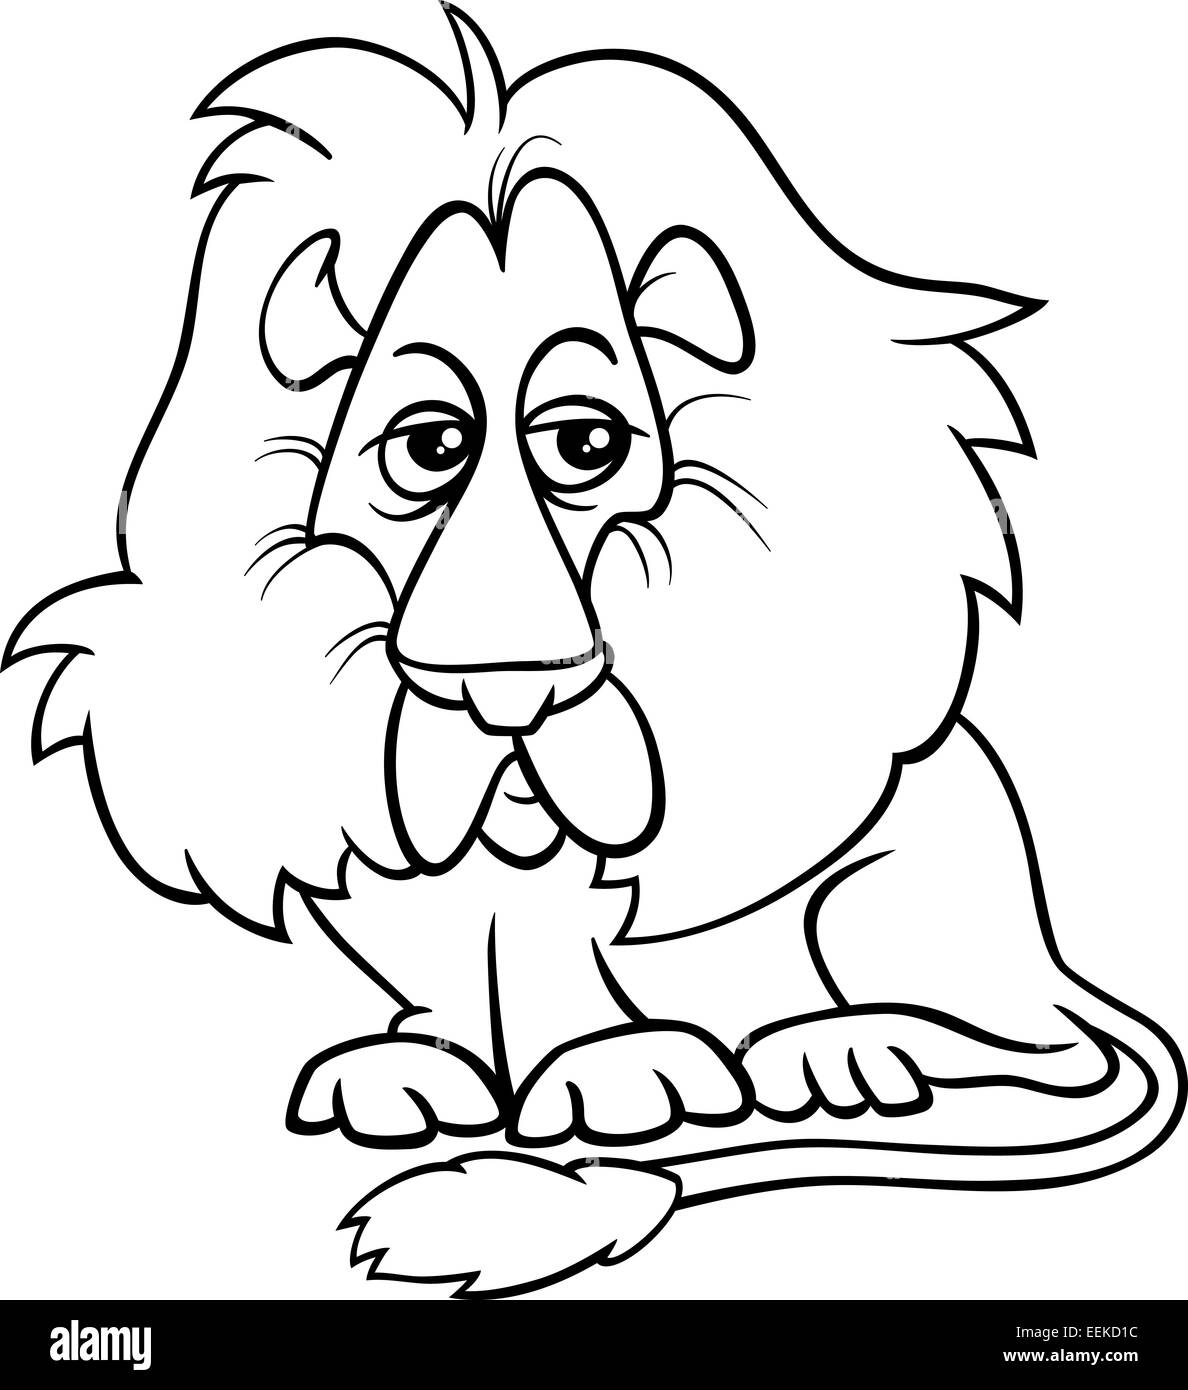 Black and White Cartoon Illustration of Funny Lion Wild Cat Animal for  Coloring Book Stock Photo - Alamy